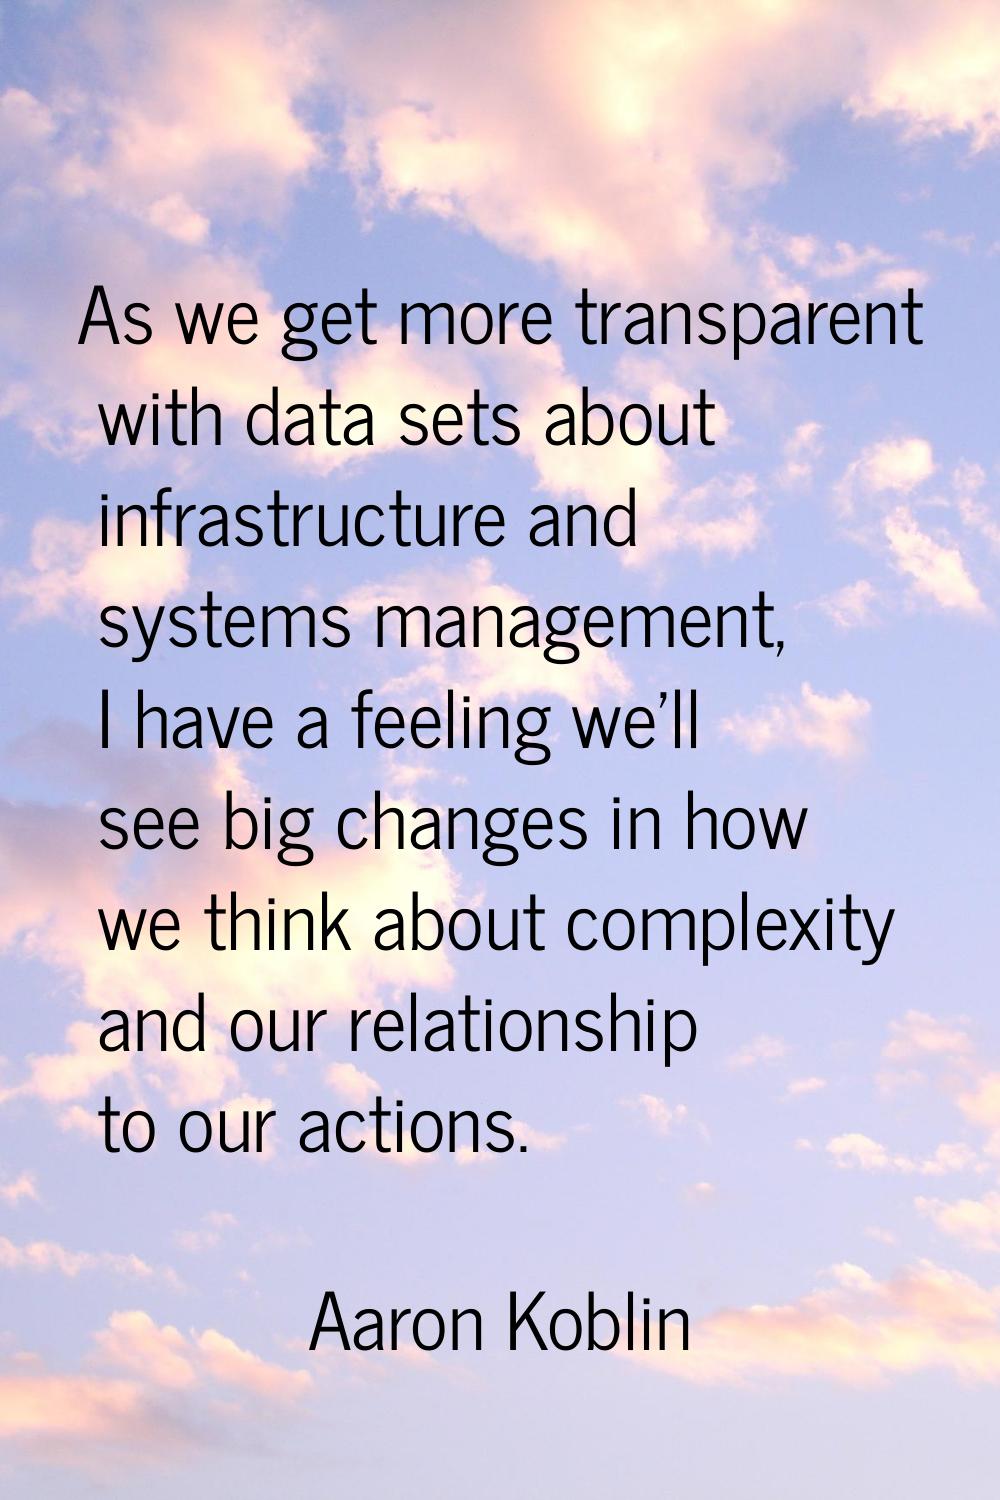 As we get more transparent with data sets about infrastructure and systems management, I have a fee